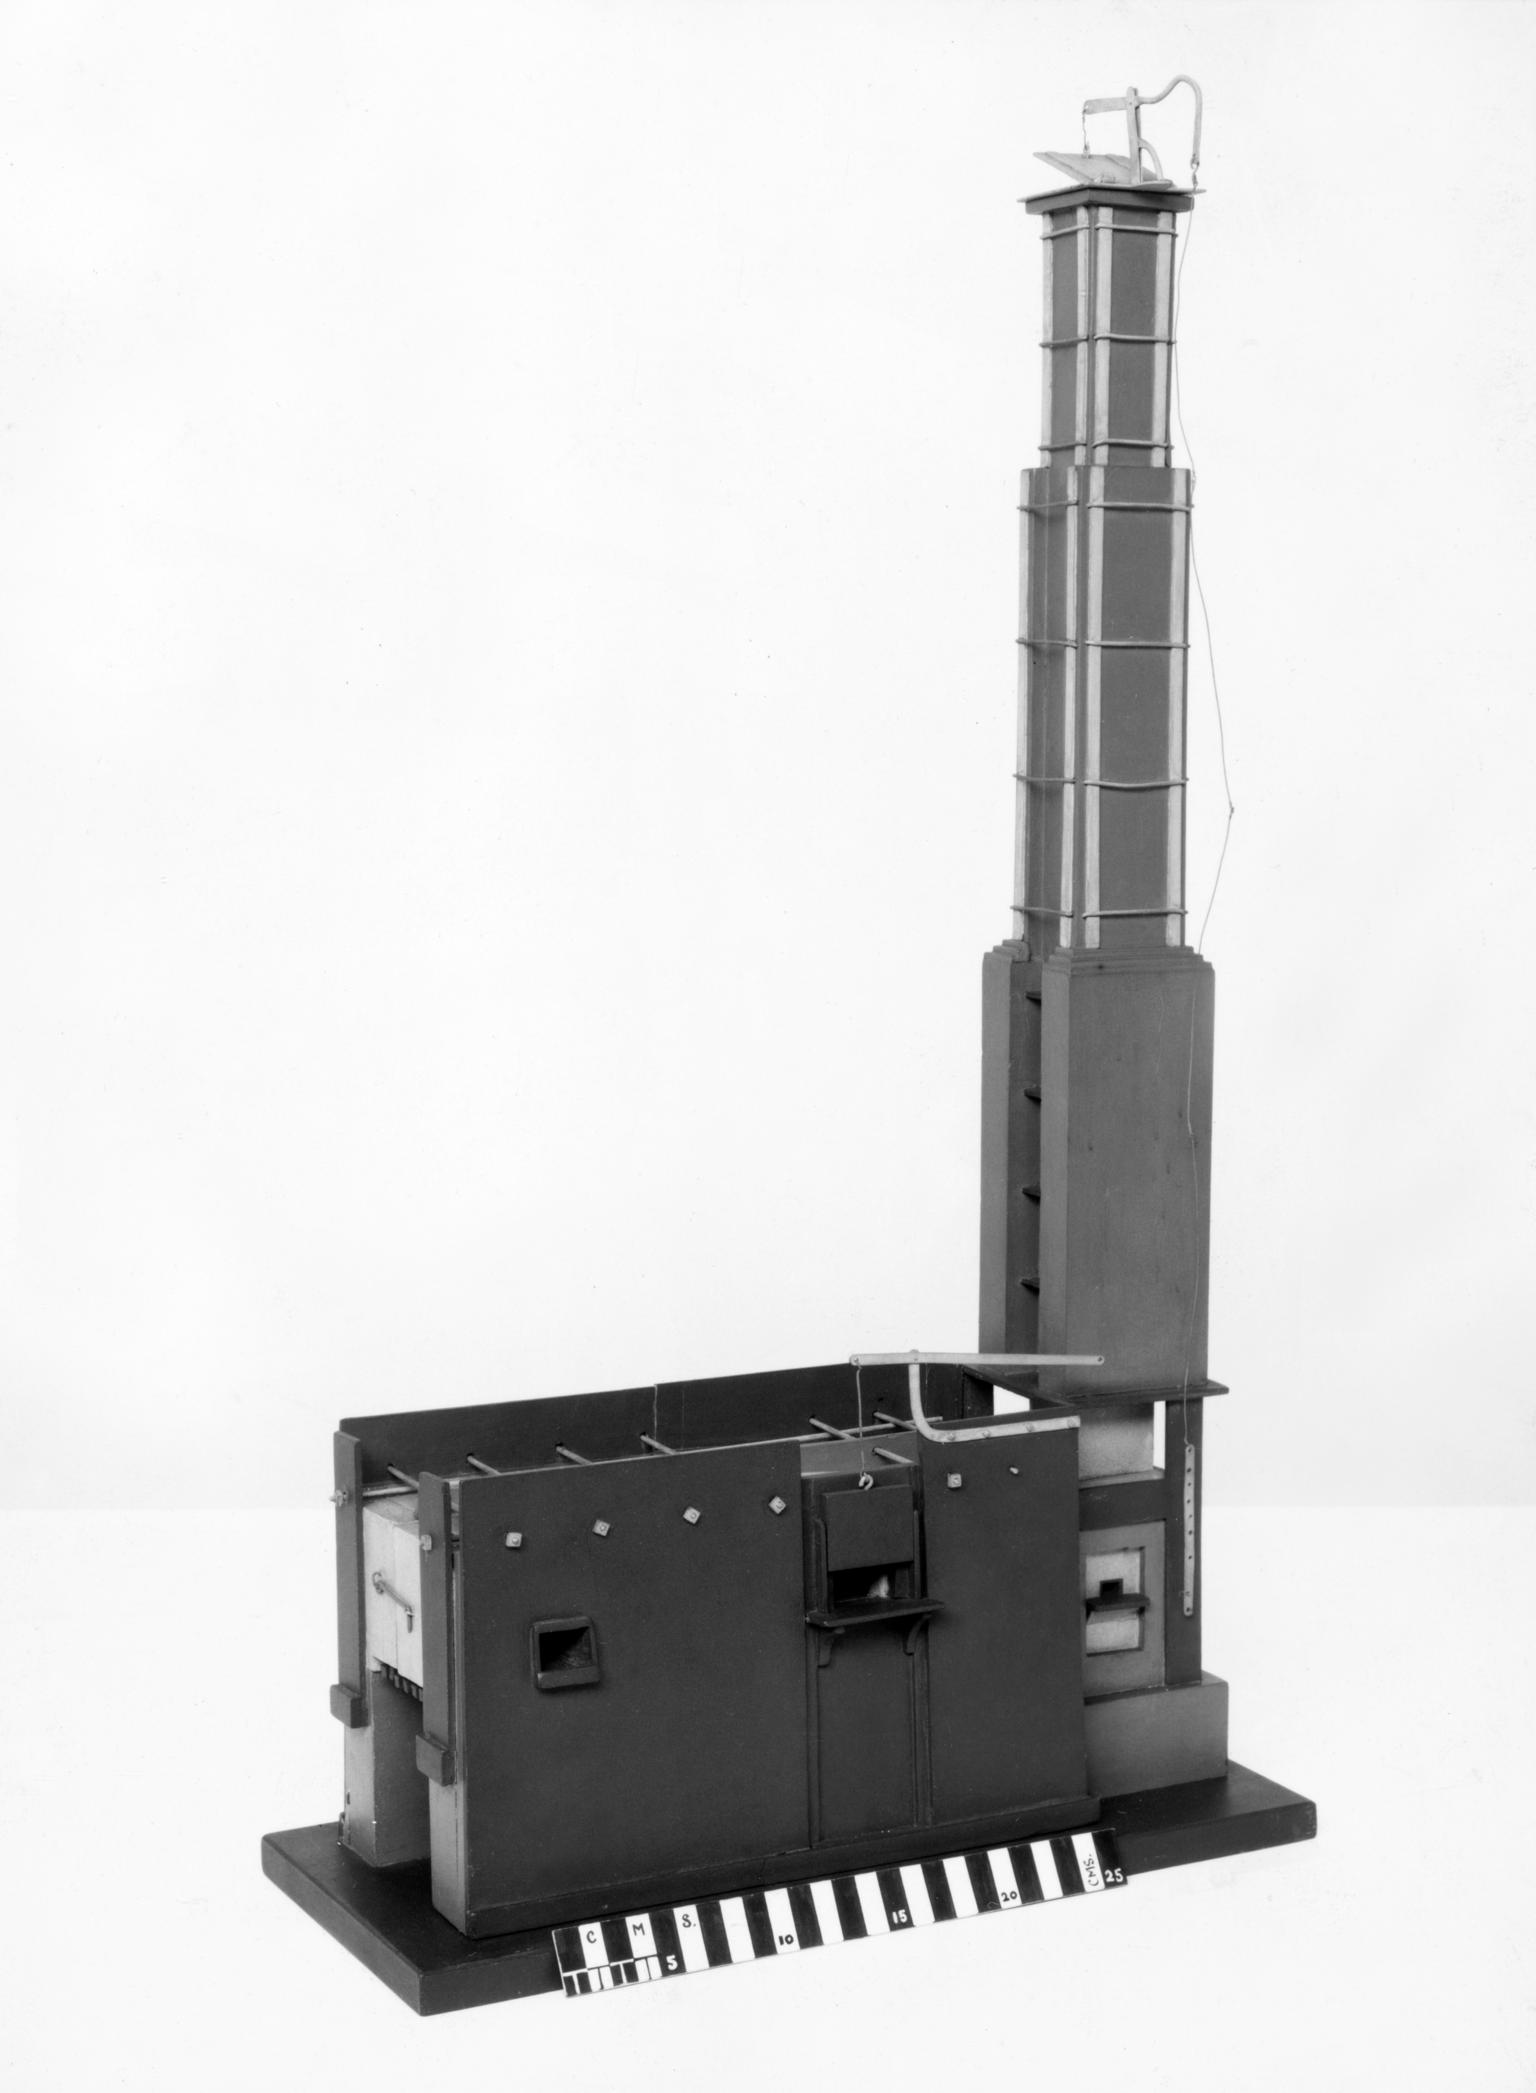 Model of a reheating furnace